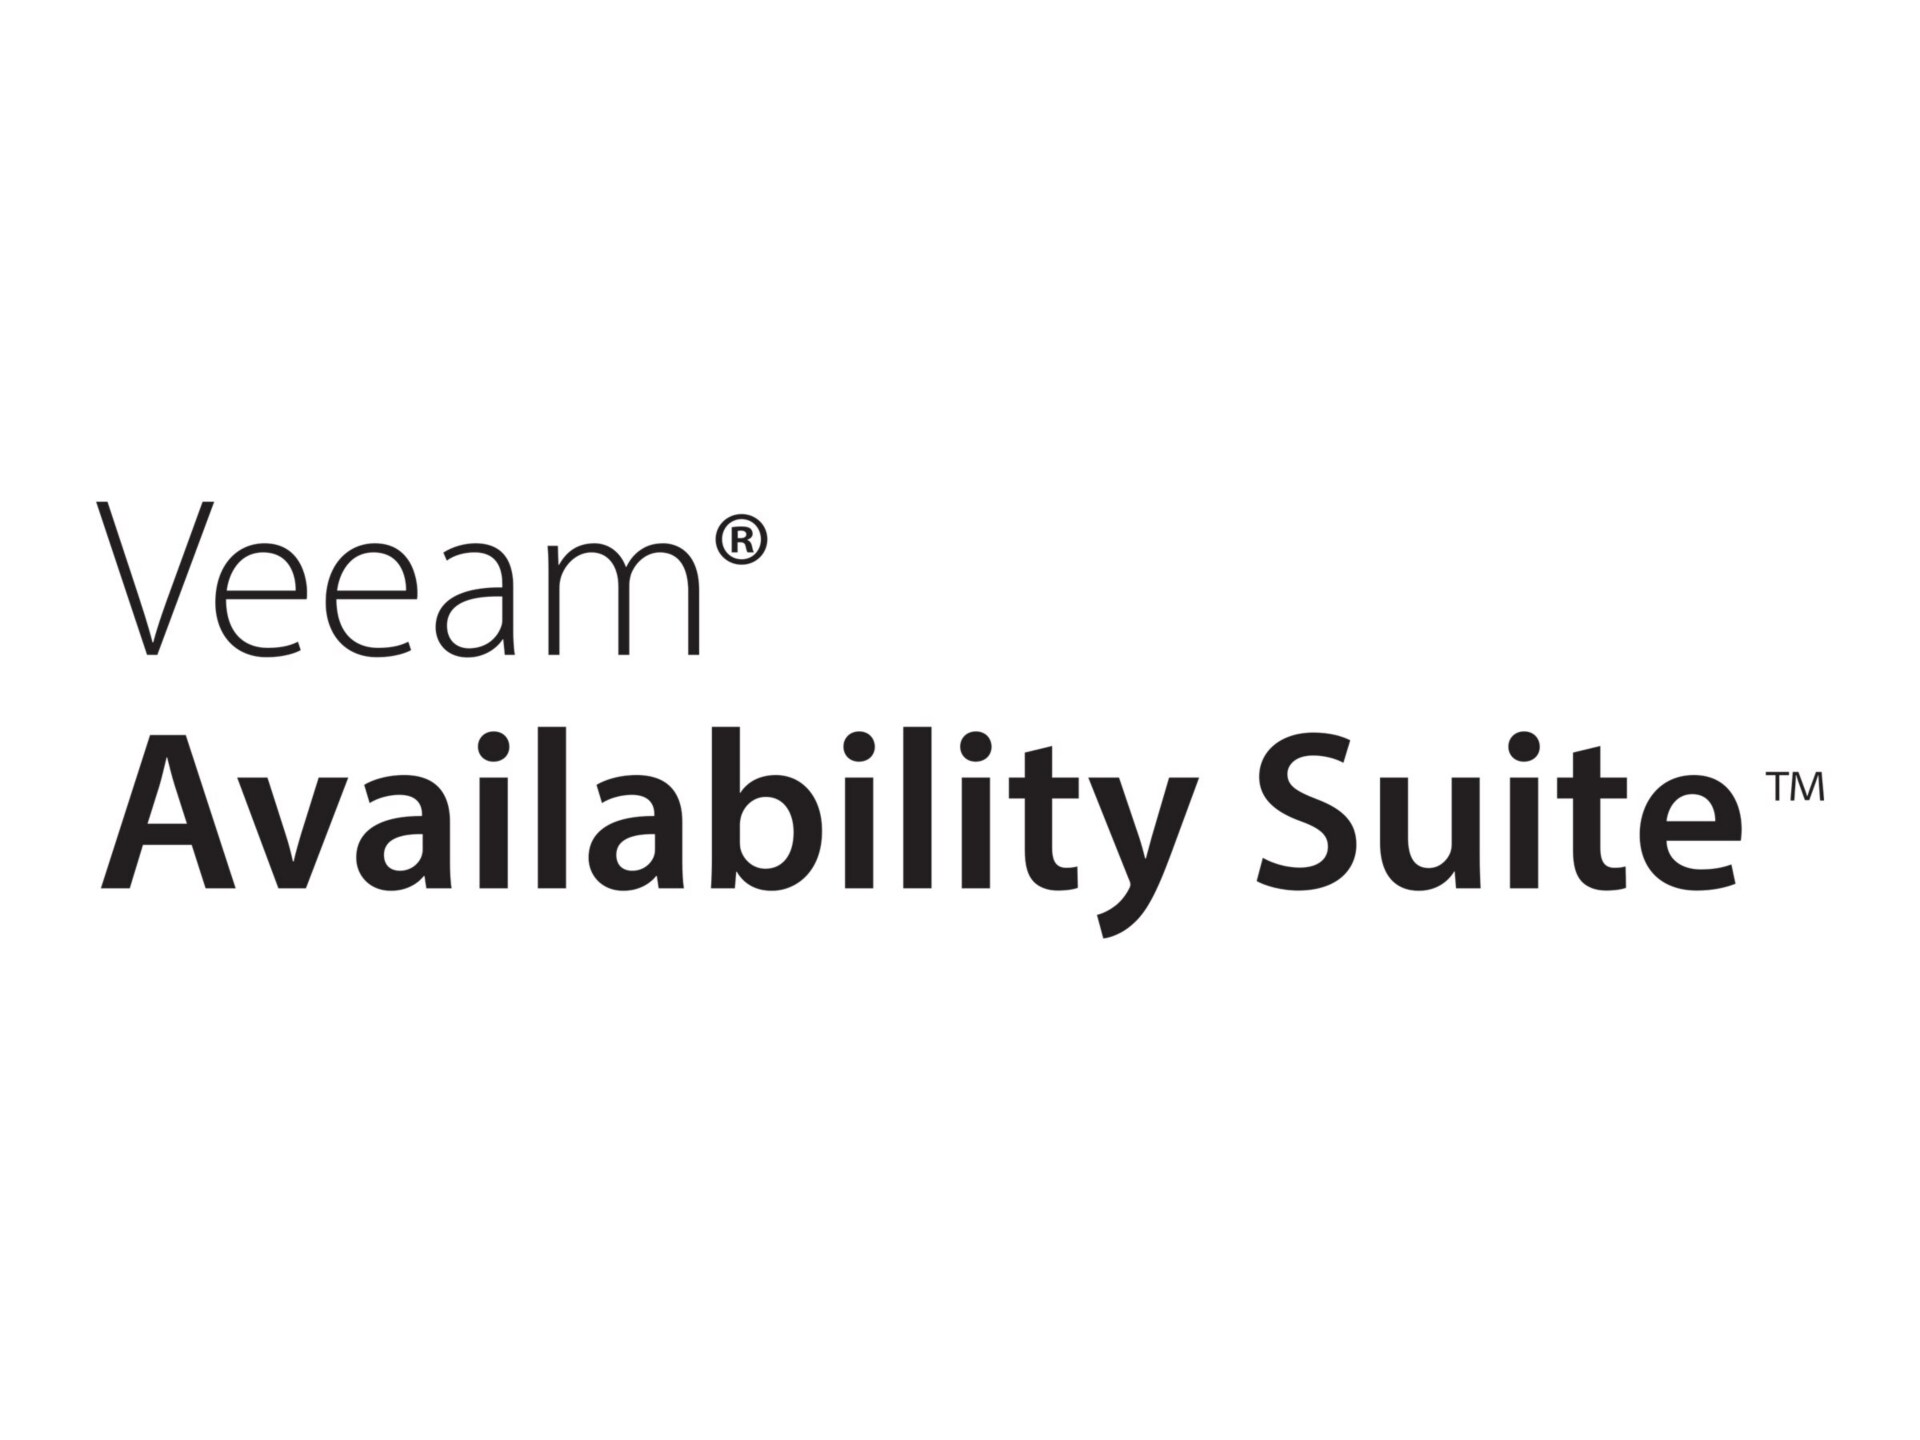 Veeam Availability Suite Universal License - Upfront Billing License (3 years) + Production Support - 250 TB NAS